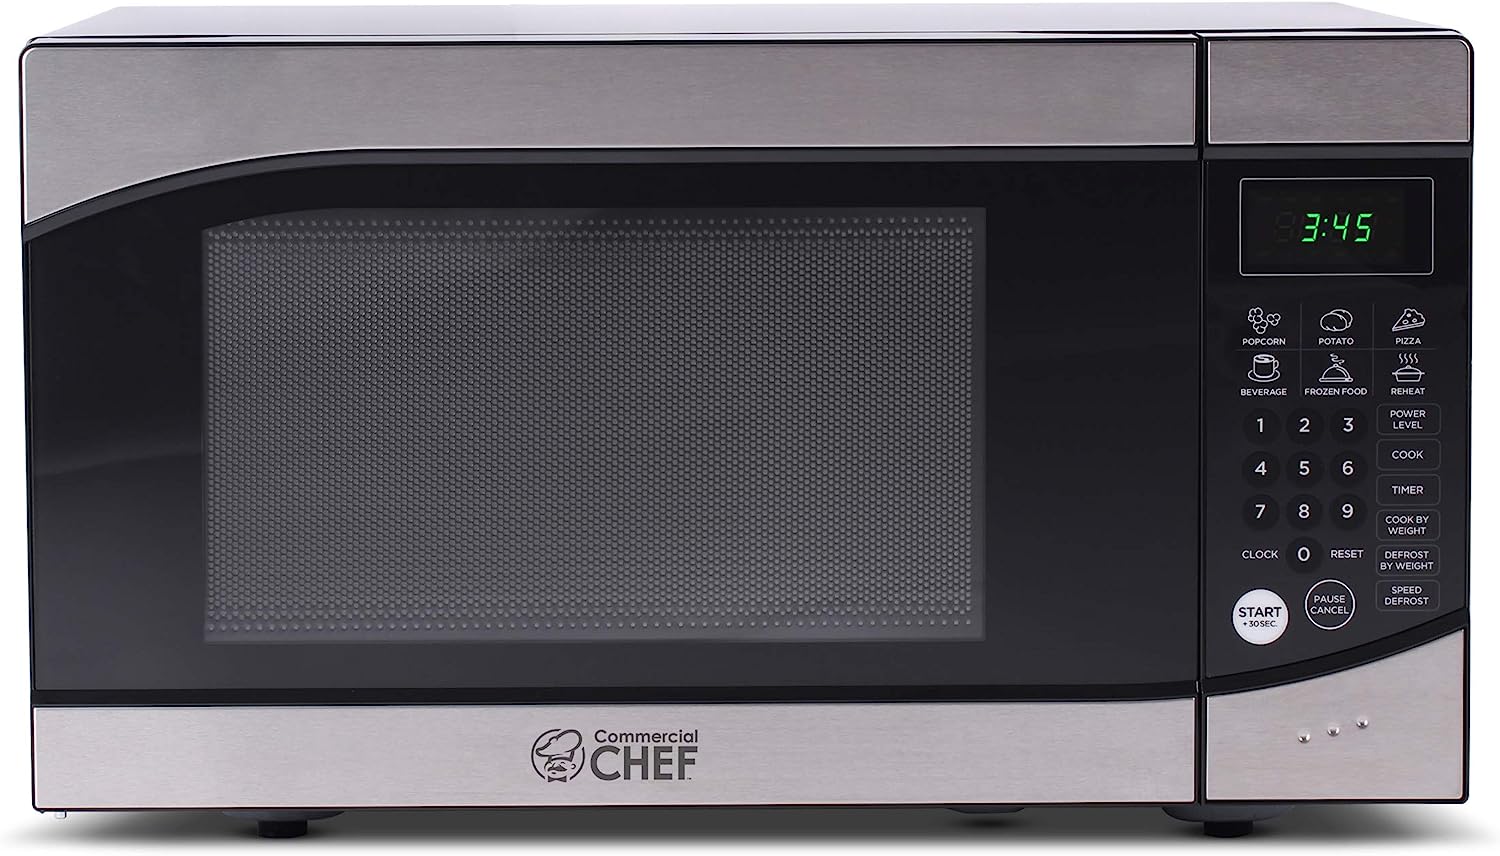 https://bigbigmart.com/wp-content/uploads/2023/07/Countertop-0.9-Cubic-Feet-Microwave-Oven-900-Watt-Stainless-Steel-Front-with-Black-Cabinet-Commercial-Chef-CHM0098.jpg